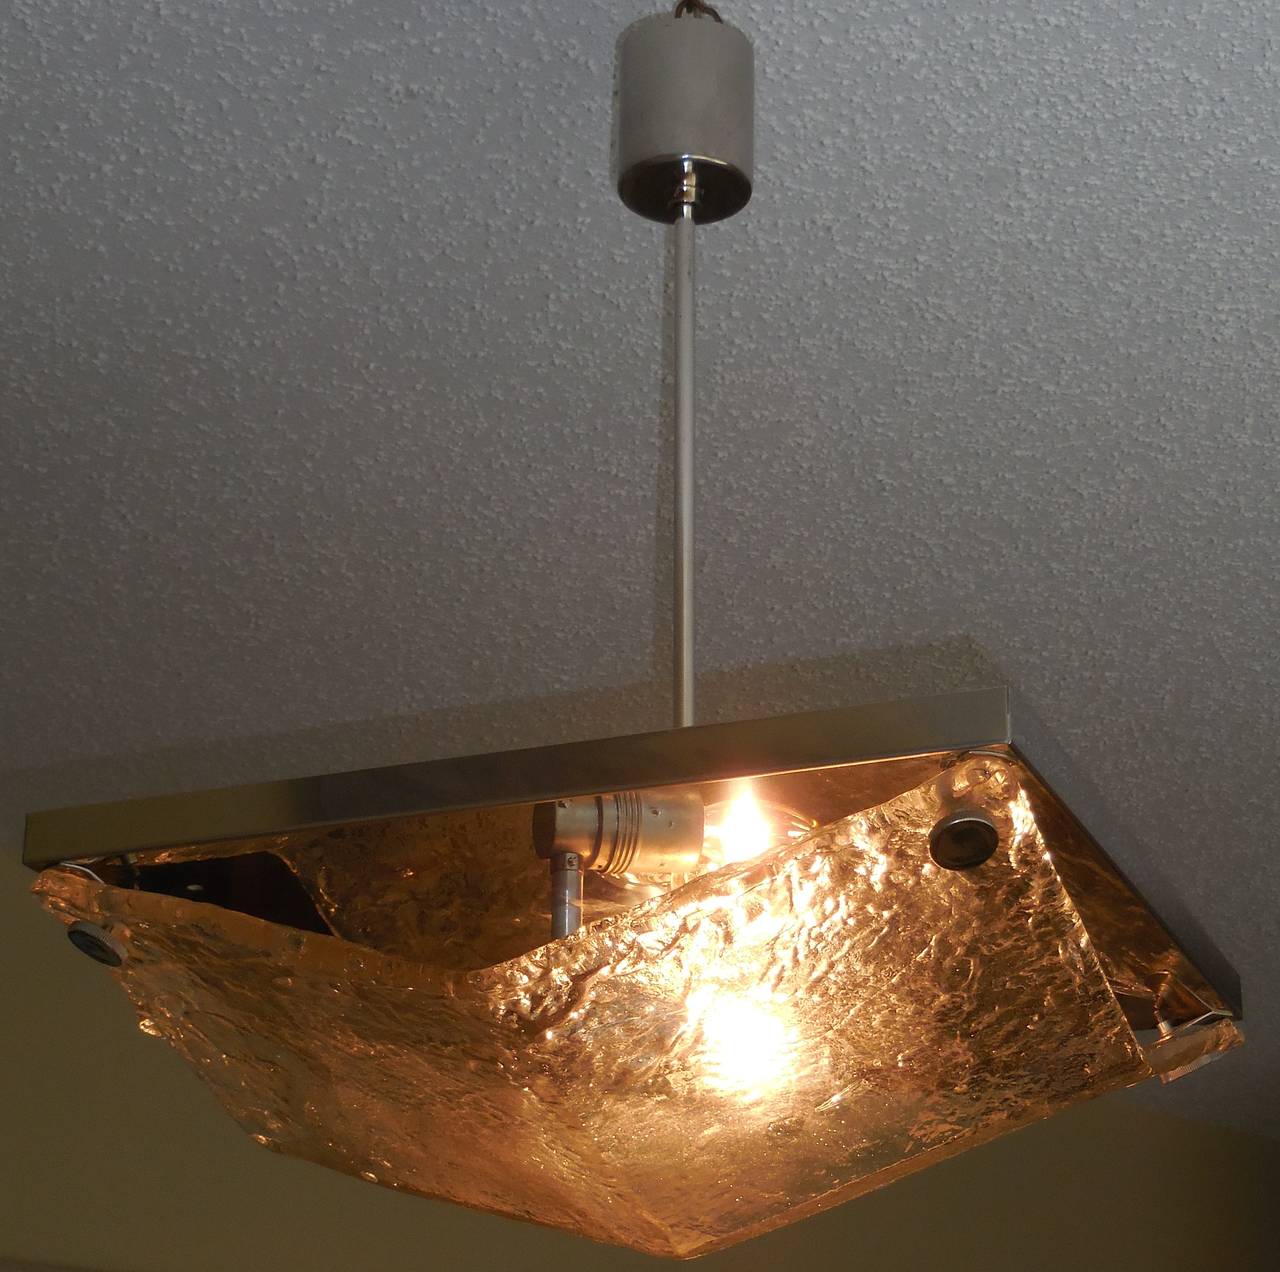 Texture glass chandelier made of one plate large glass folded in four corners.
Polish chrome plate hardware with two 60/ watt light.
Electrified and ready to use.
Could use as a flush mount.
Height could be adjusted.
Light body size without the